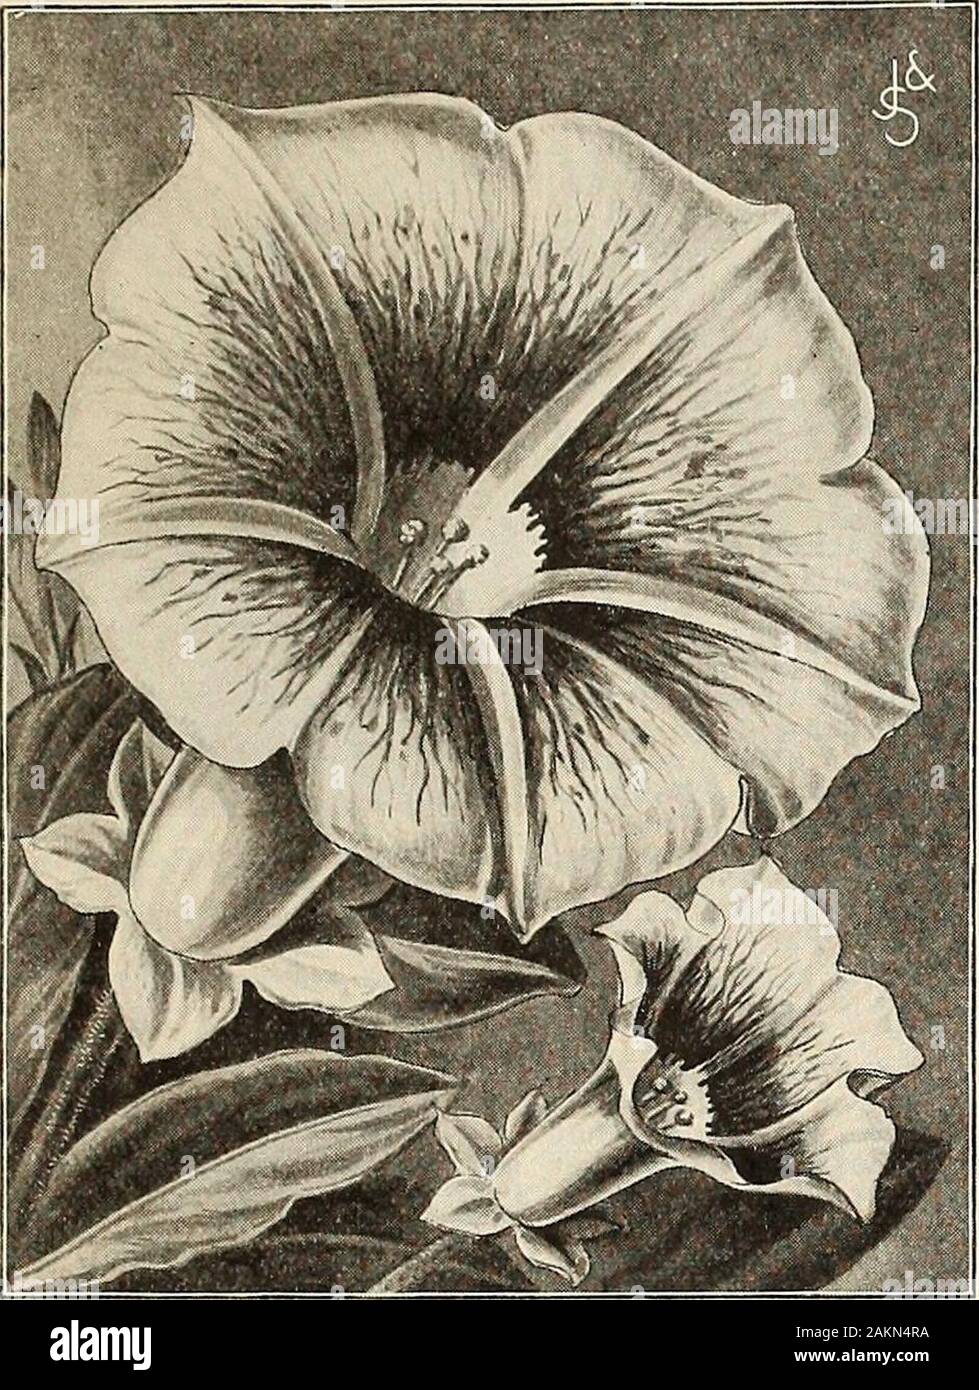 Garden and farm manual : 1905 . ery red. Pkt., 5c. 2152. Lobbs Nasturtiums, Mixed.Pkt., 5c; oz., 15o. 2158. Princess Victoria Louise.Creamy-white, with conspicuous orange-scarlet blotches and spur. One of thefinest, Pkt., 6c. 2159. Giant of Battles. SulphHr,with red blotches; very free-flowering.Pkt., 5c; oz., 20c HOW TO GKOW PANSIES The seed can be sown from Augustto March. The best plants and largestflowers can be obtained from seed sow*in August, September or October in acold frame with a southern aspectPlenty of air and light is essential.During mild weather sashes should beremoved. The pl Stock Photo